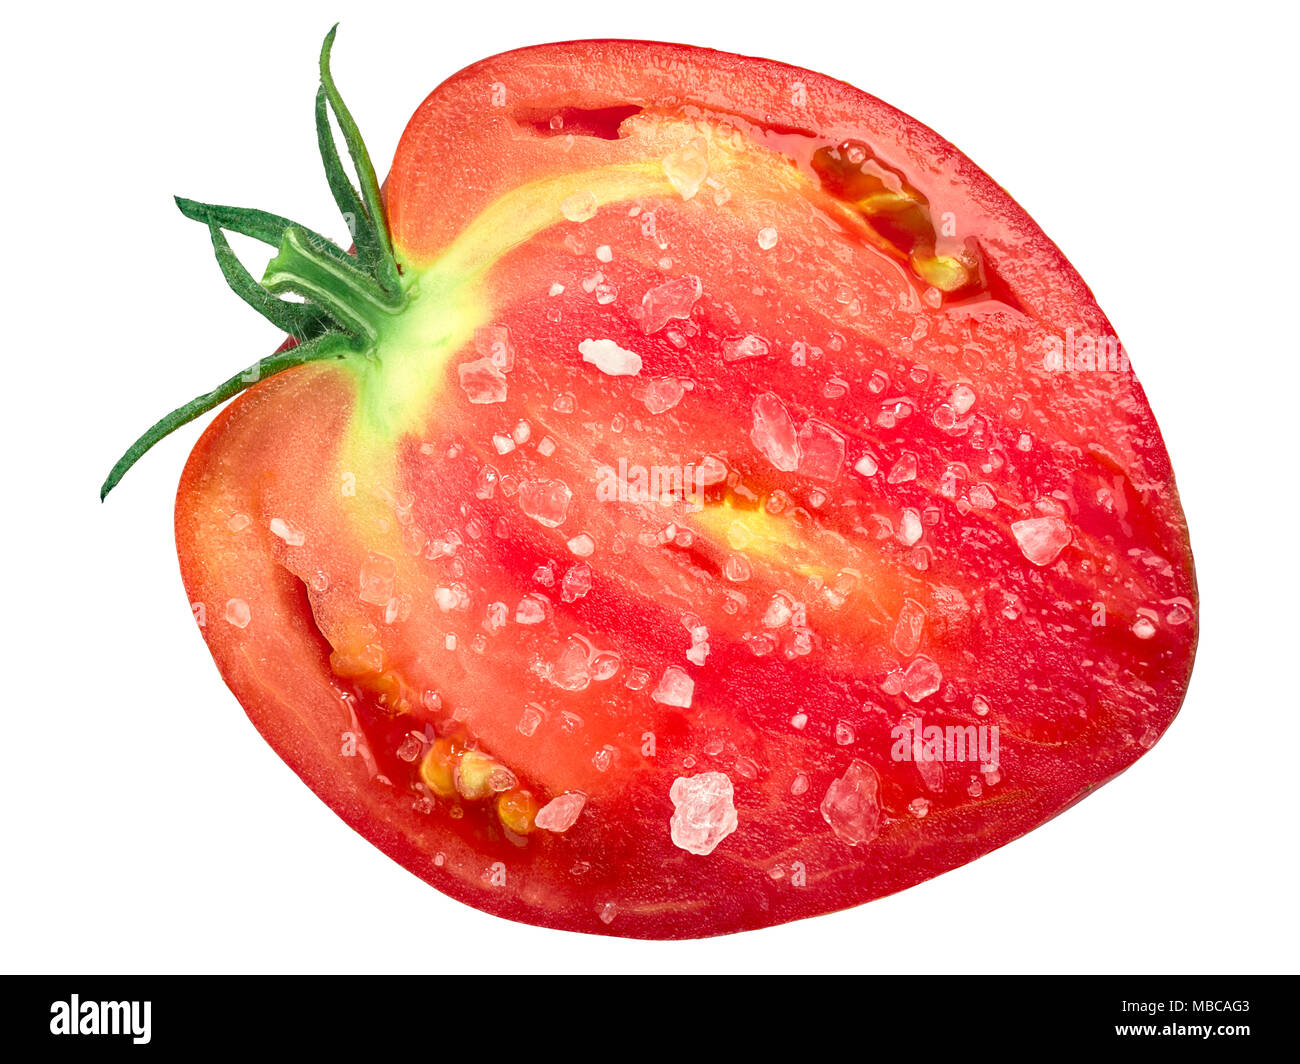 Slice or half of oxheart Cuor di bue tomato, salted, top view Stock Photo